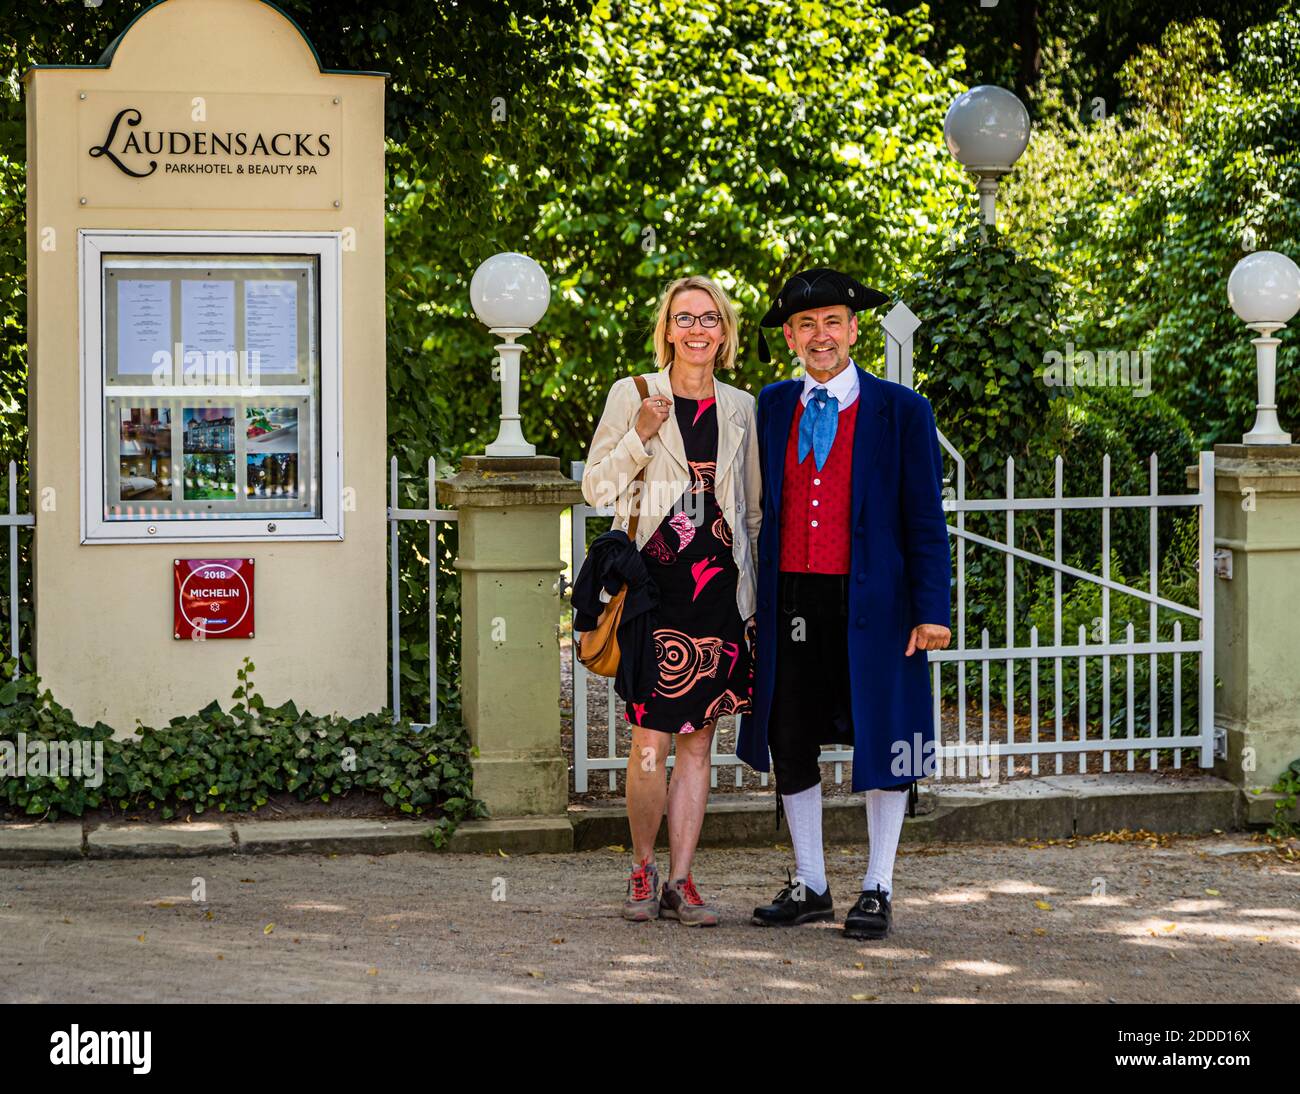 Bad Kissingen City guide Hermann Laudensack in traditional costume, Germany Stock Photo